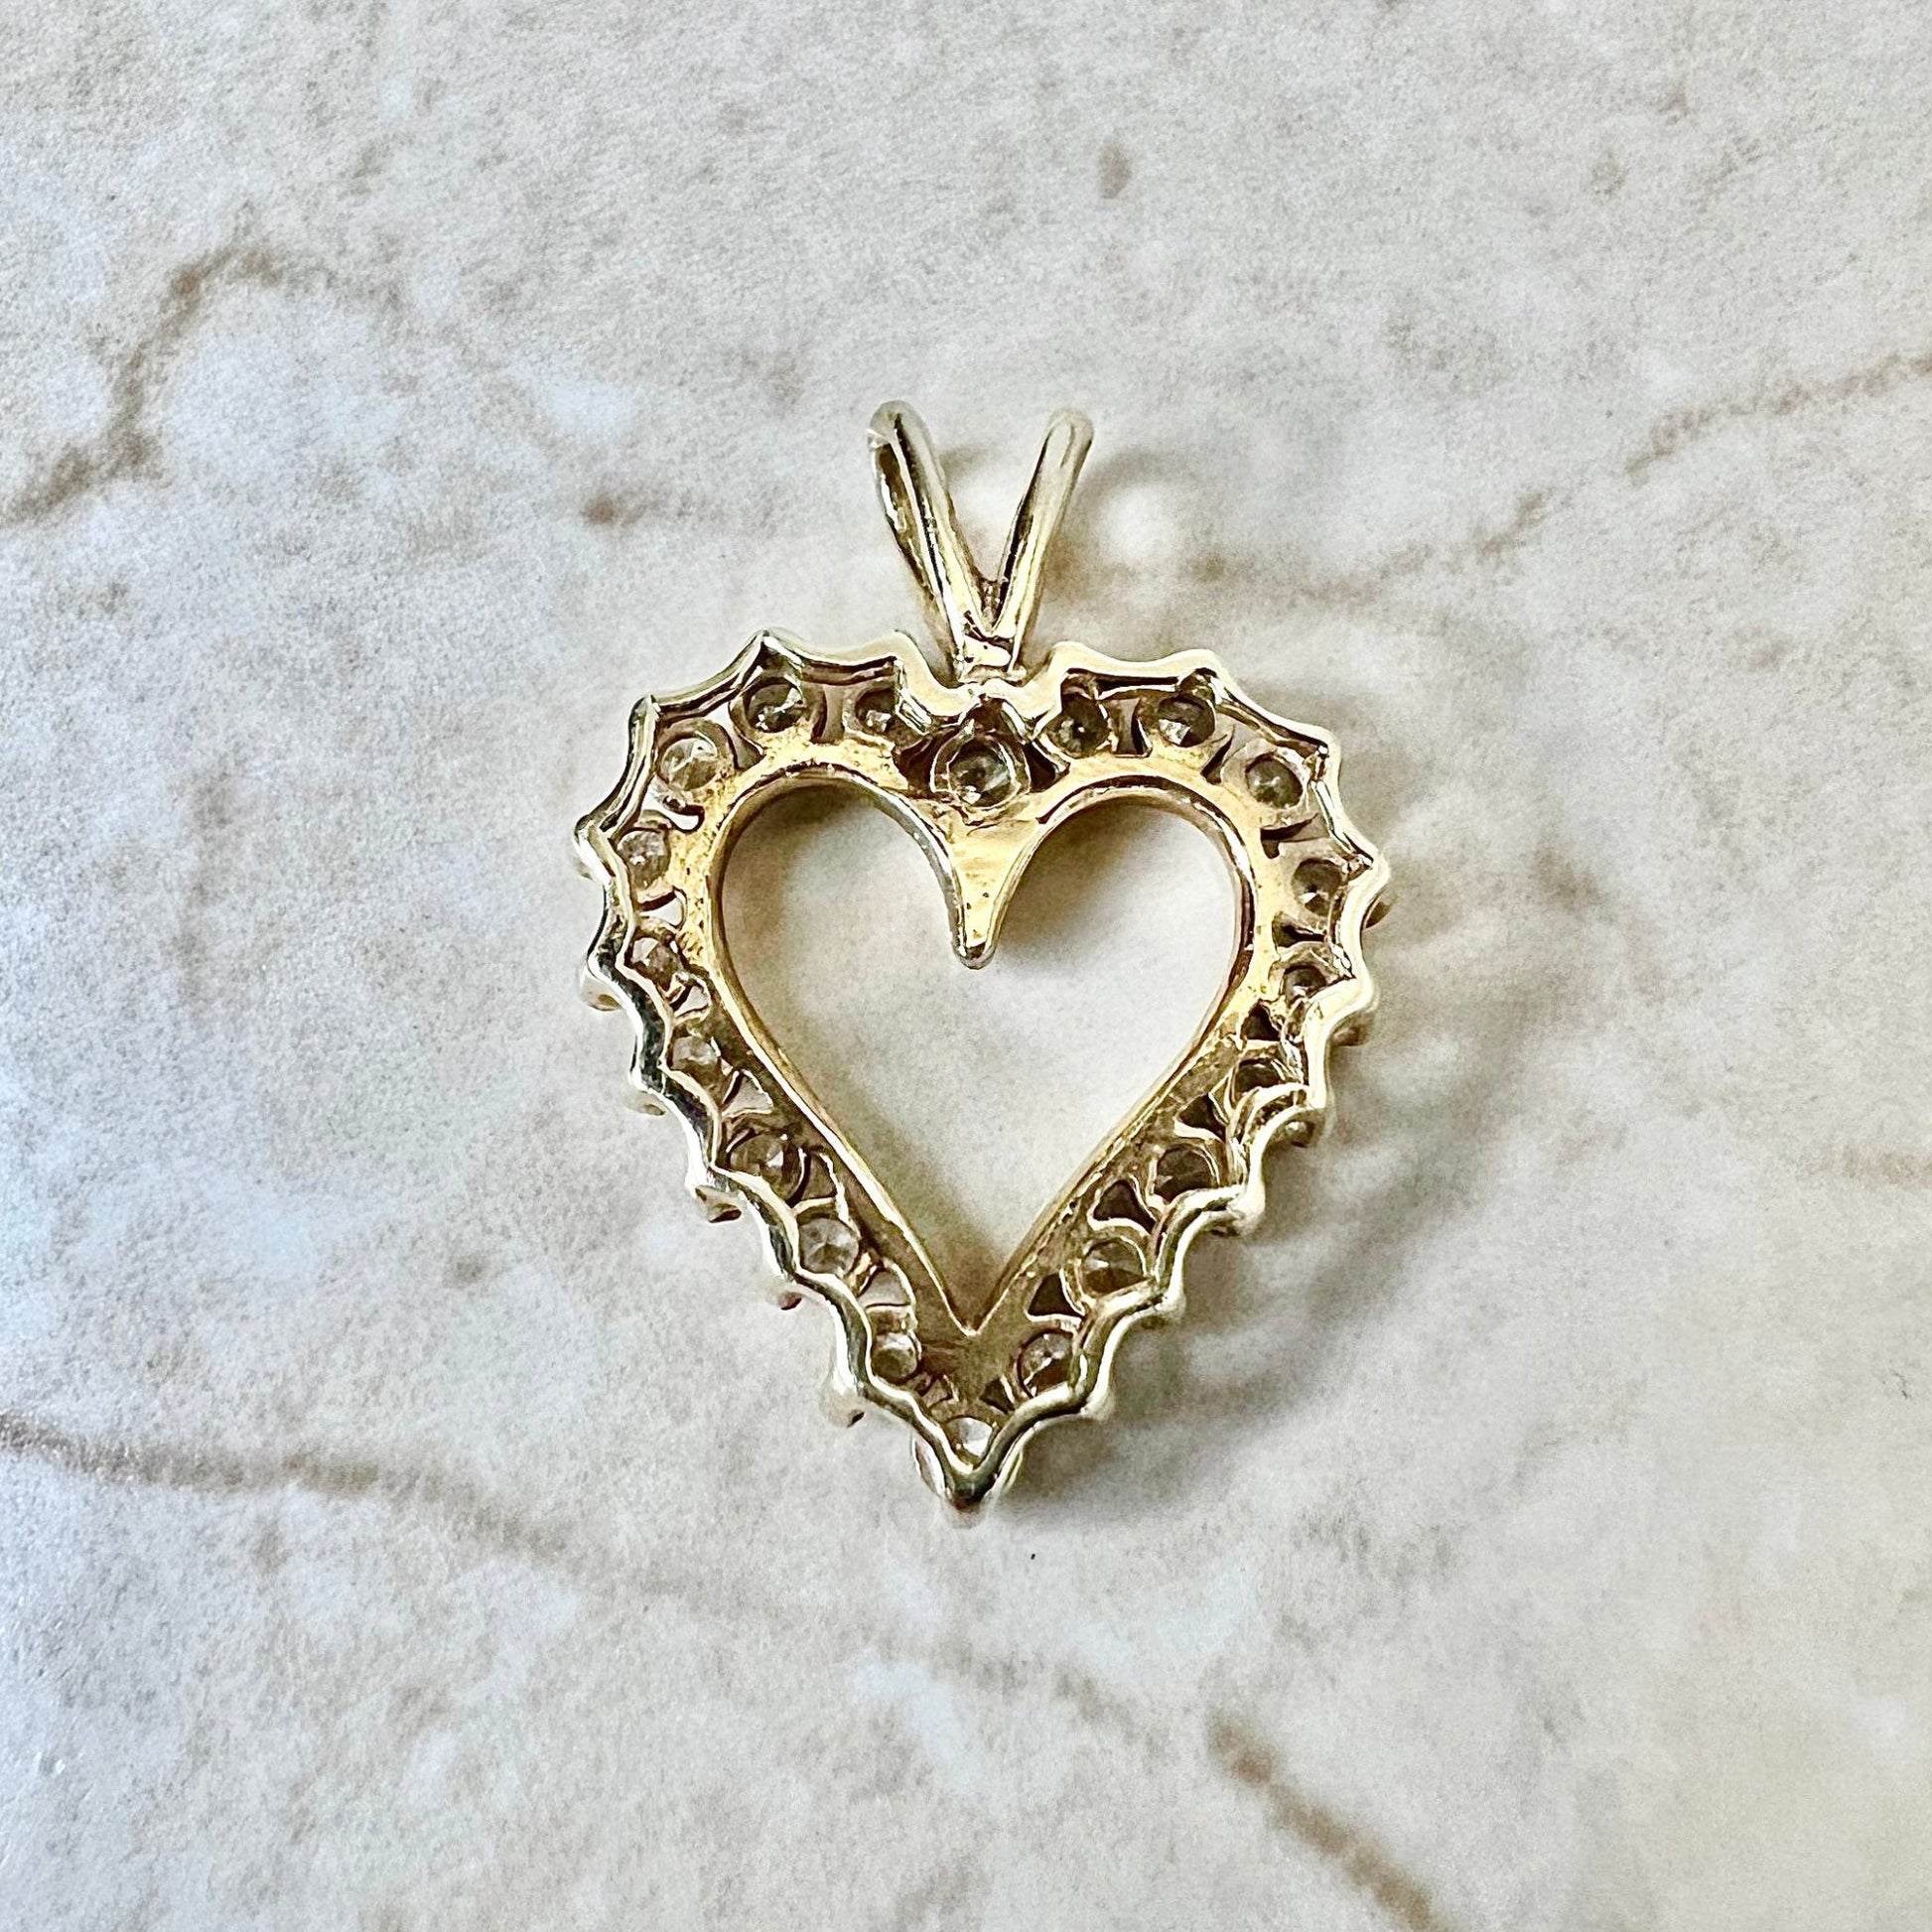 1 CTTW 14K Gold Diamond Heart Pendant - Yellow Gold Diamond Pendant Necklace - Heart Necklace - Valentine’s Day Gifts - Best Gifts For Her